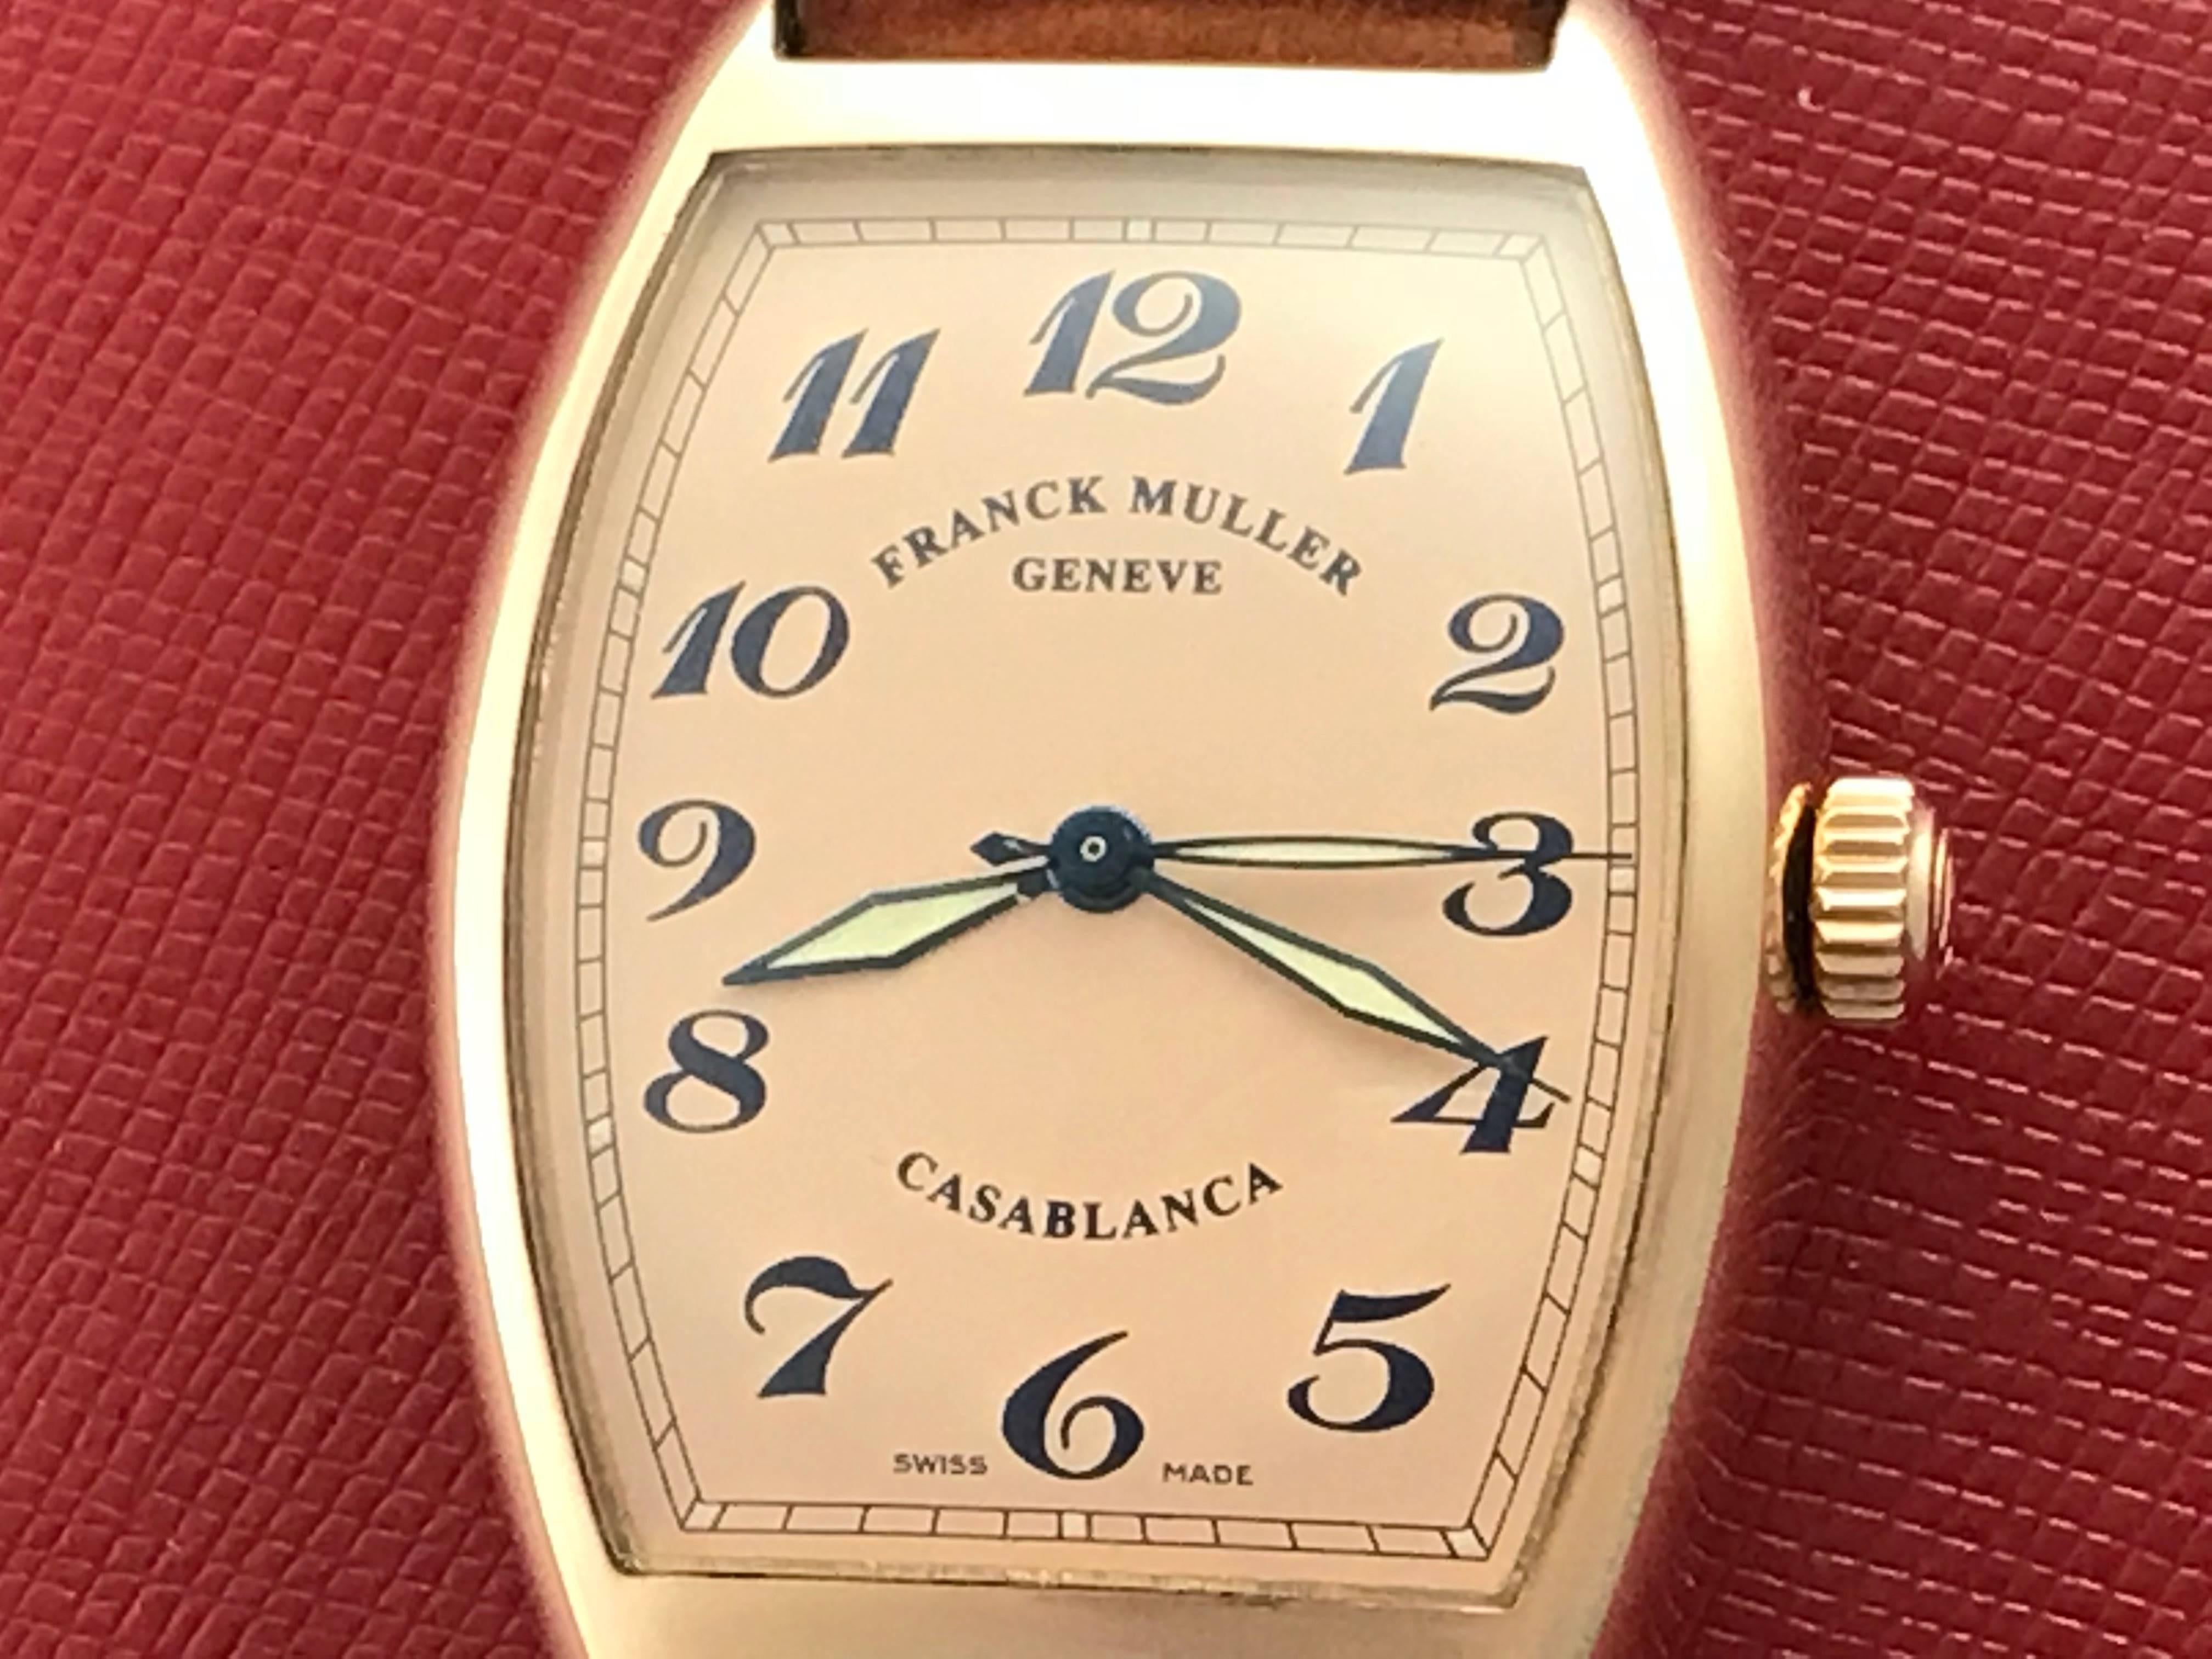 Stunning Franck Muller Men's certified pre-owned automatic wrist watch, Model H. Features a Salmon Dial with black arabic numerals, 18K rose Gold rectangular tonneau style case and brown strap with 18K rose Gold Franck Muller buckle. Measures